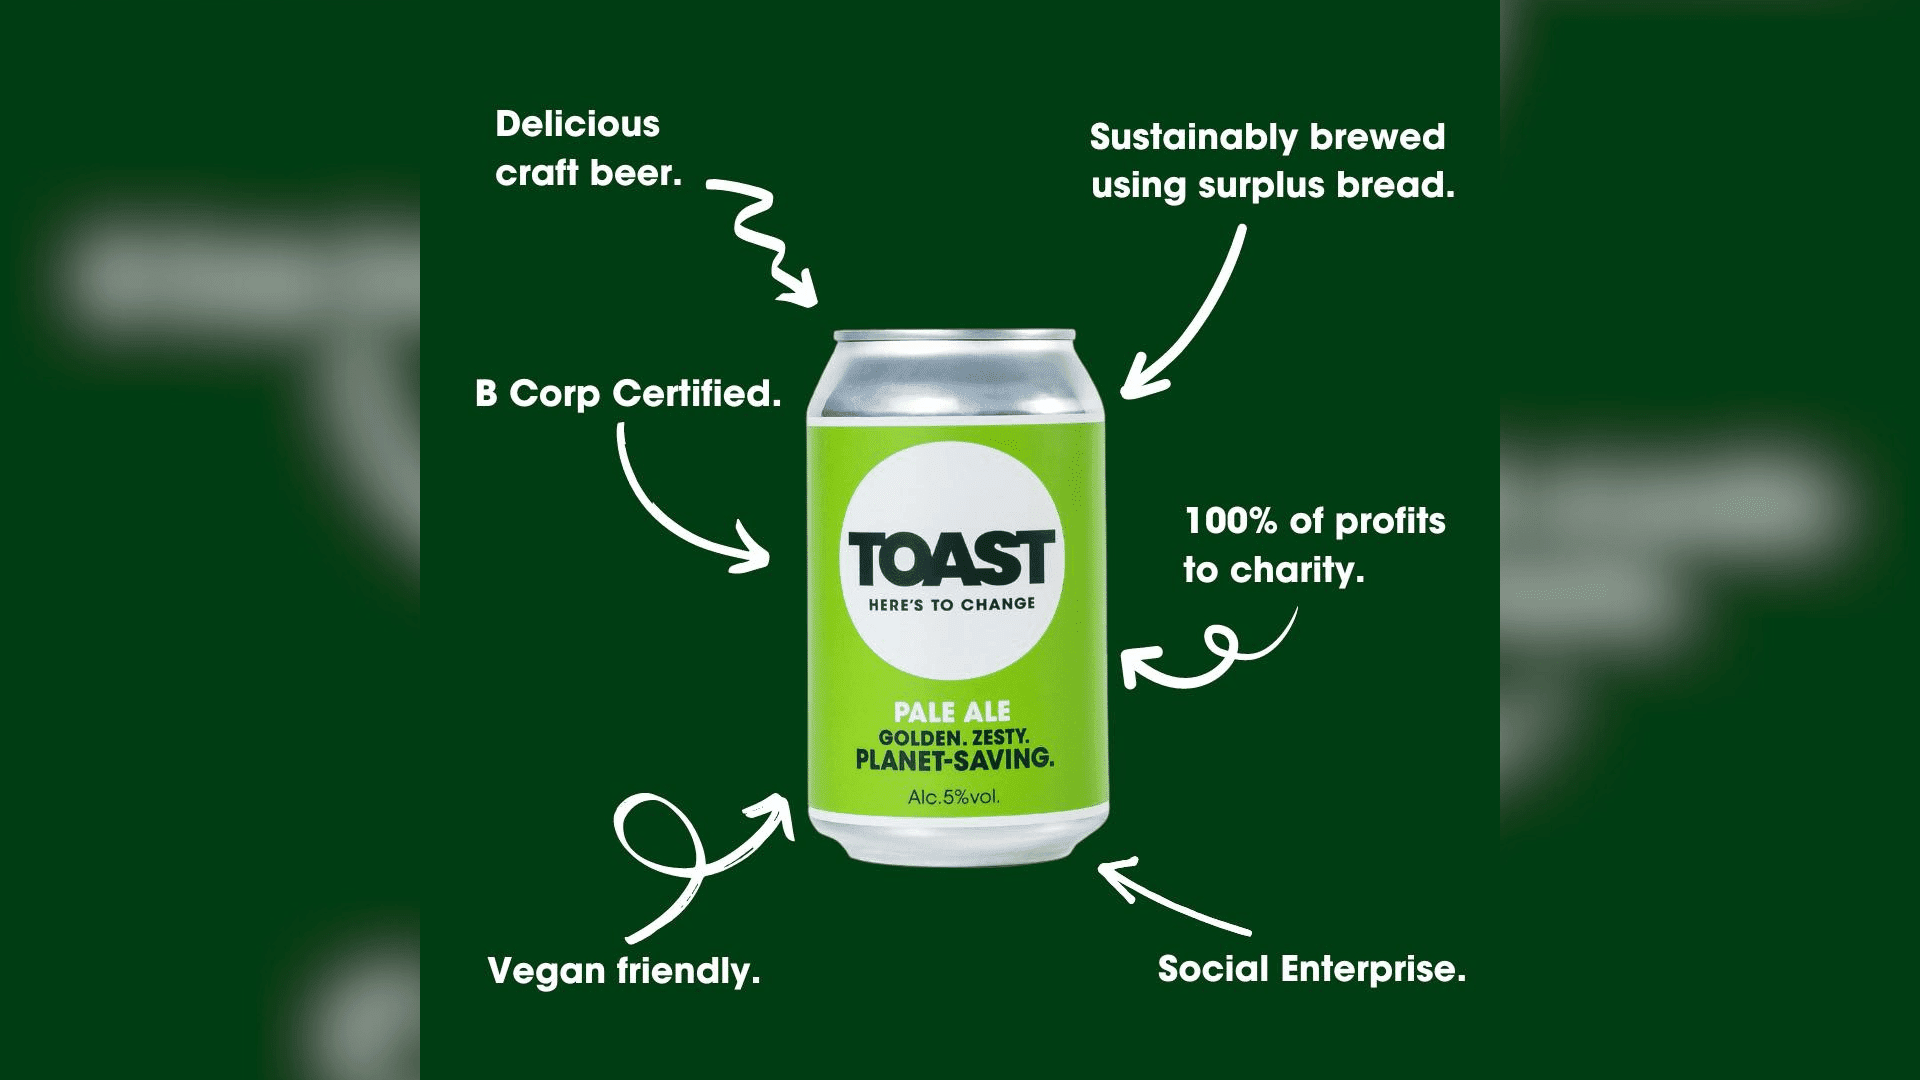 Toast Ale's sustainability practices